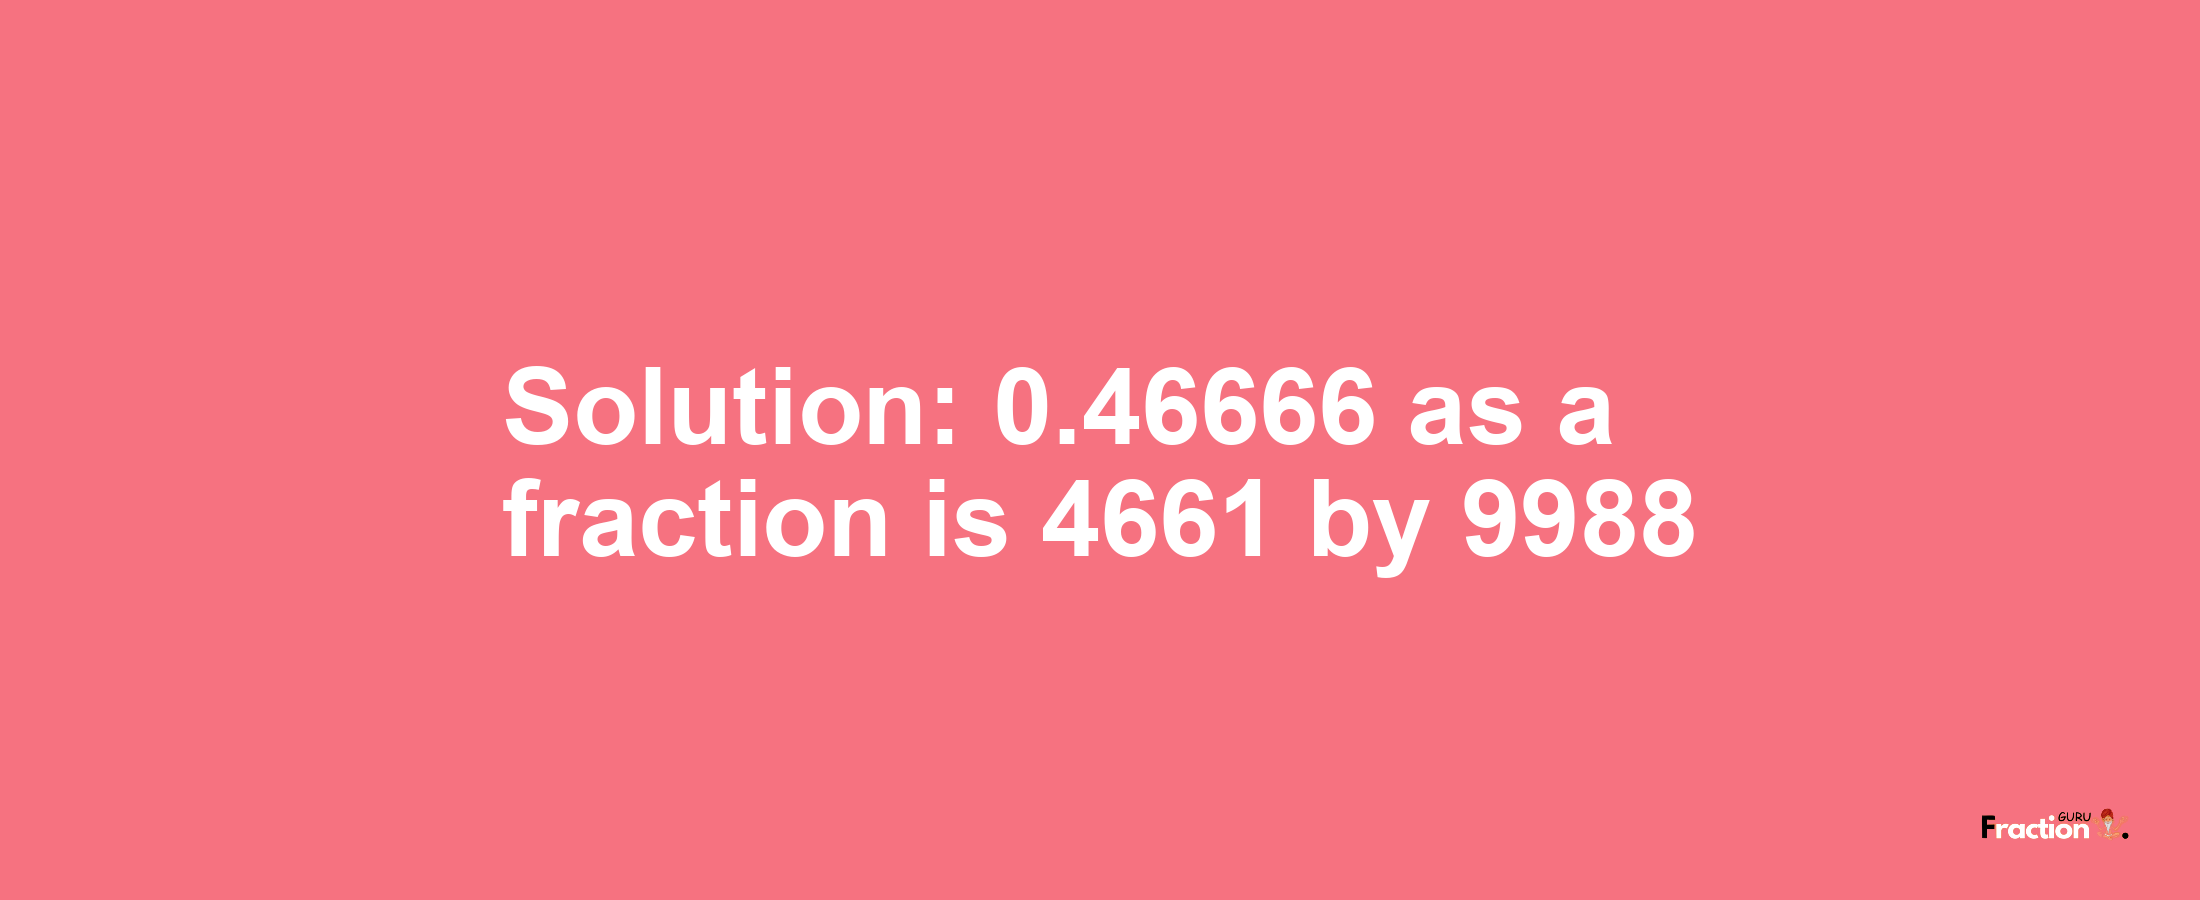 Solution:0.46666 as a fraction is 4661/9988